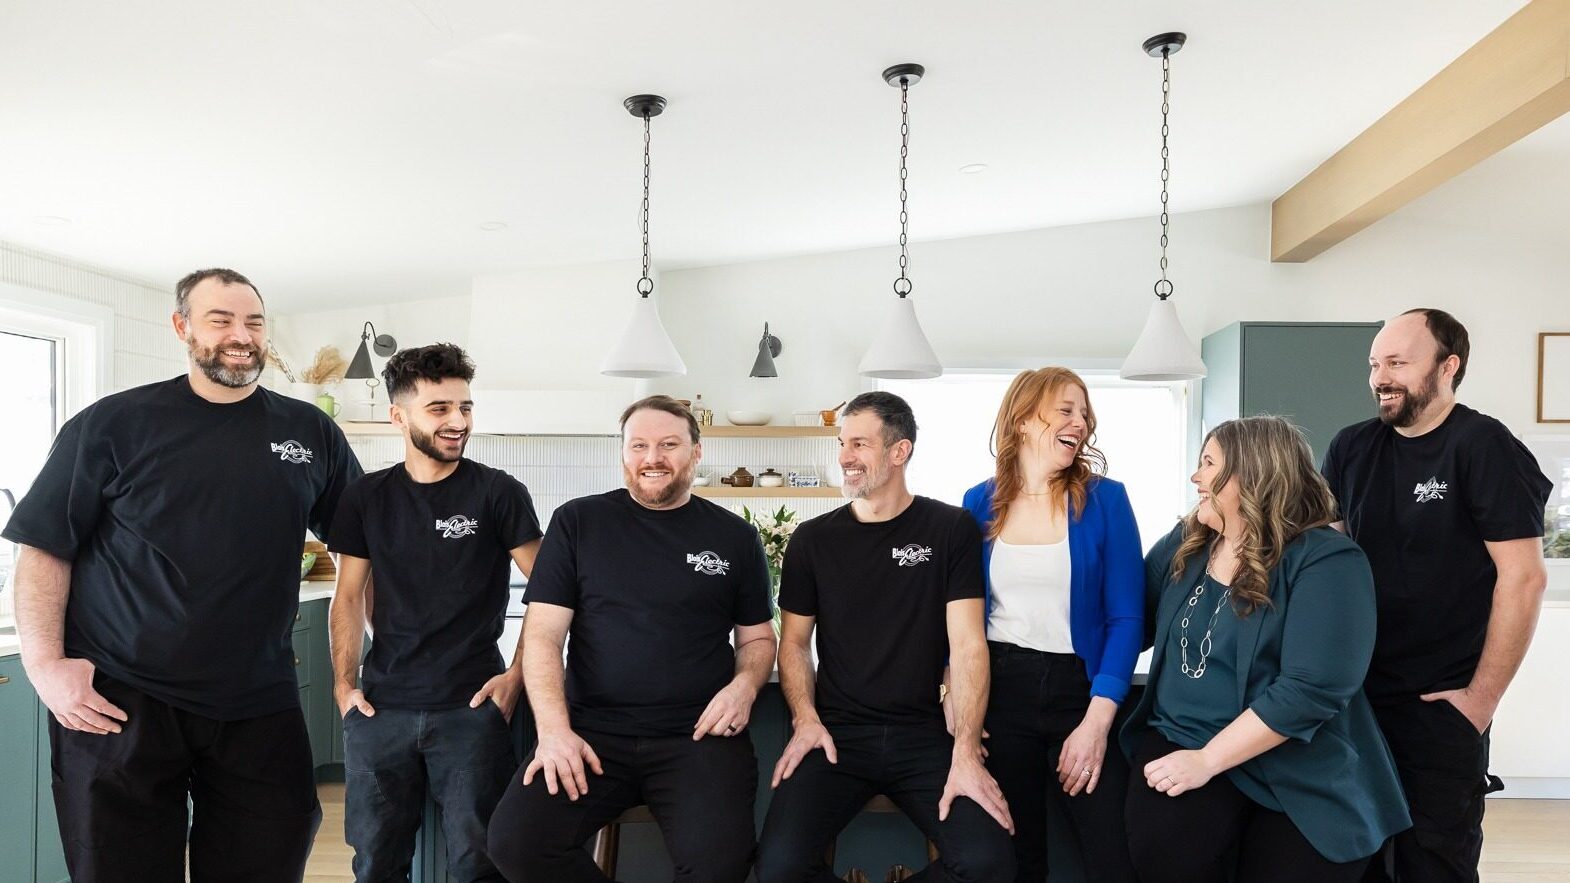 Seven adults stand and sit in a modern kitchen, smiling and wearing black t-shirts with a white logo, looking relaxed and happy.